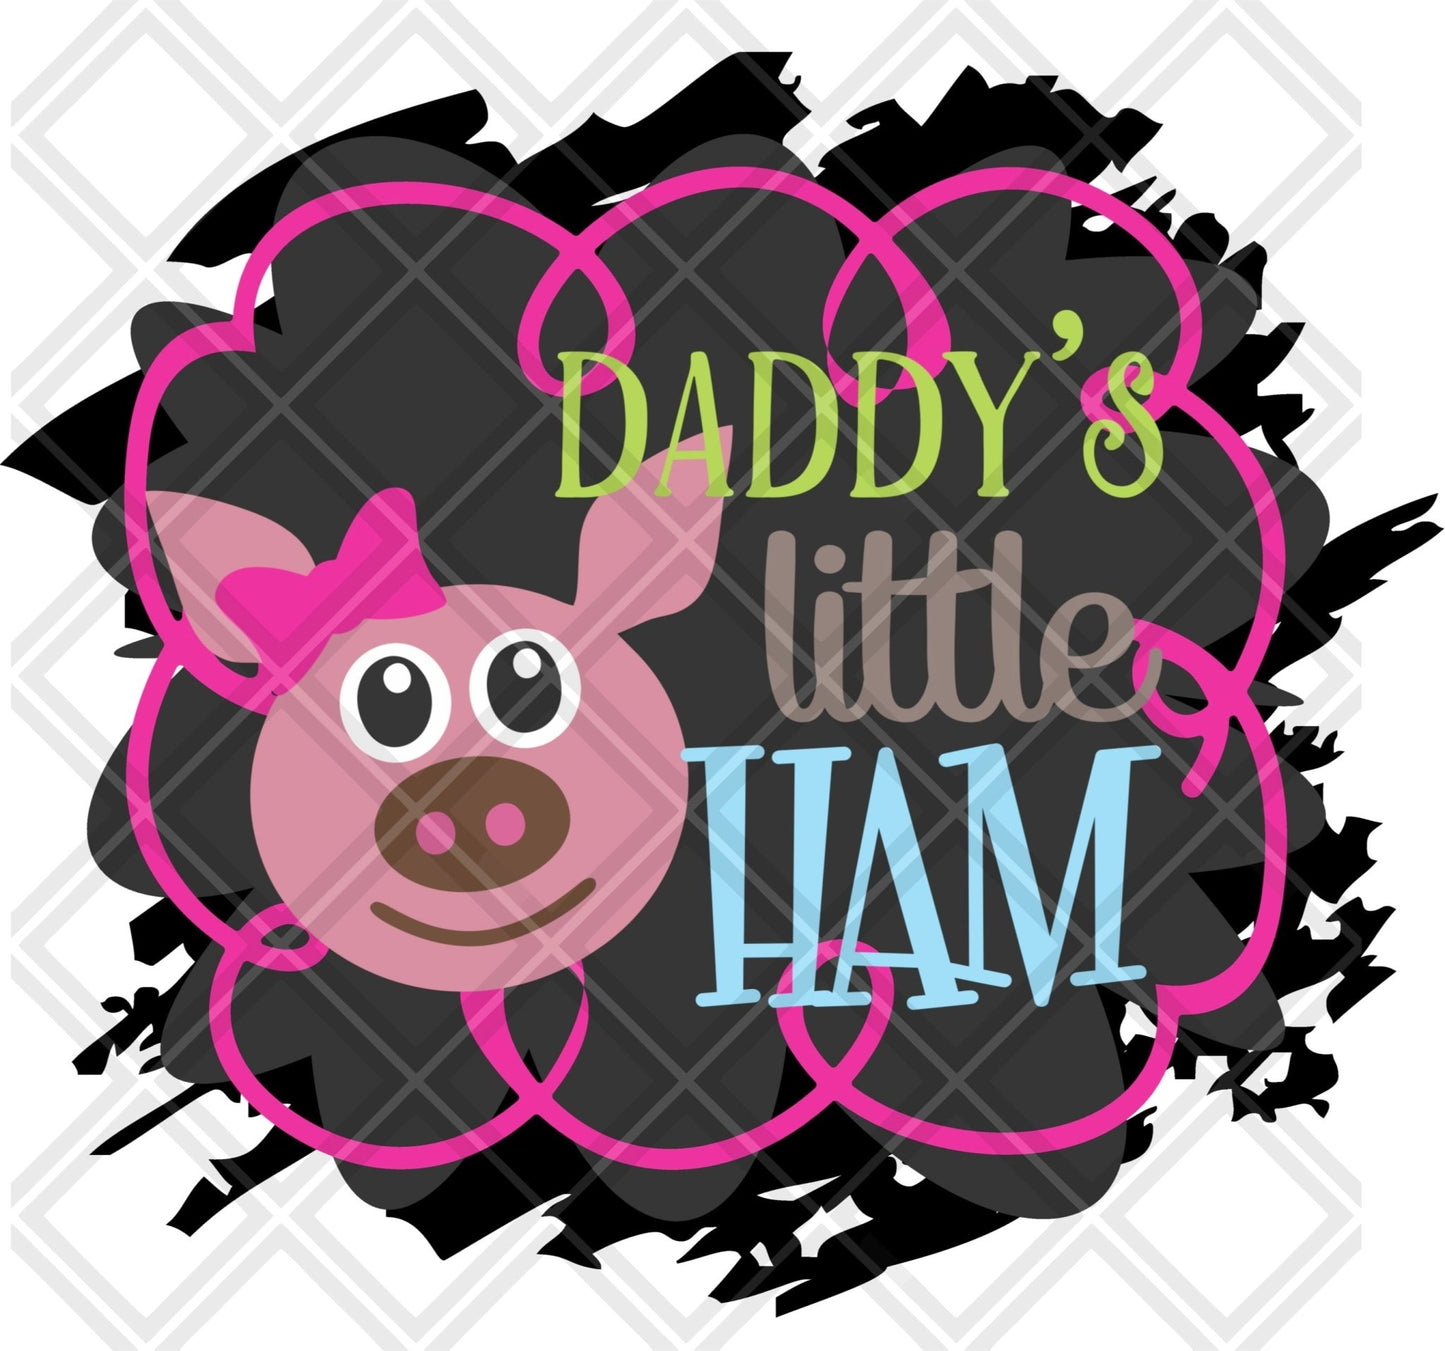 daddy's little ham Digital Download Instand Download - Do it yourself Transfers